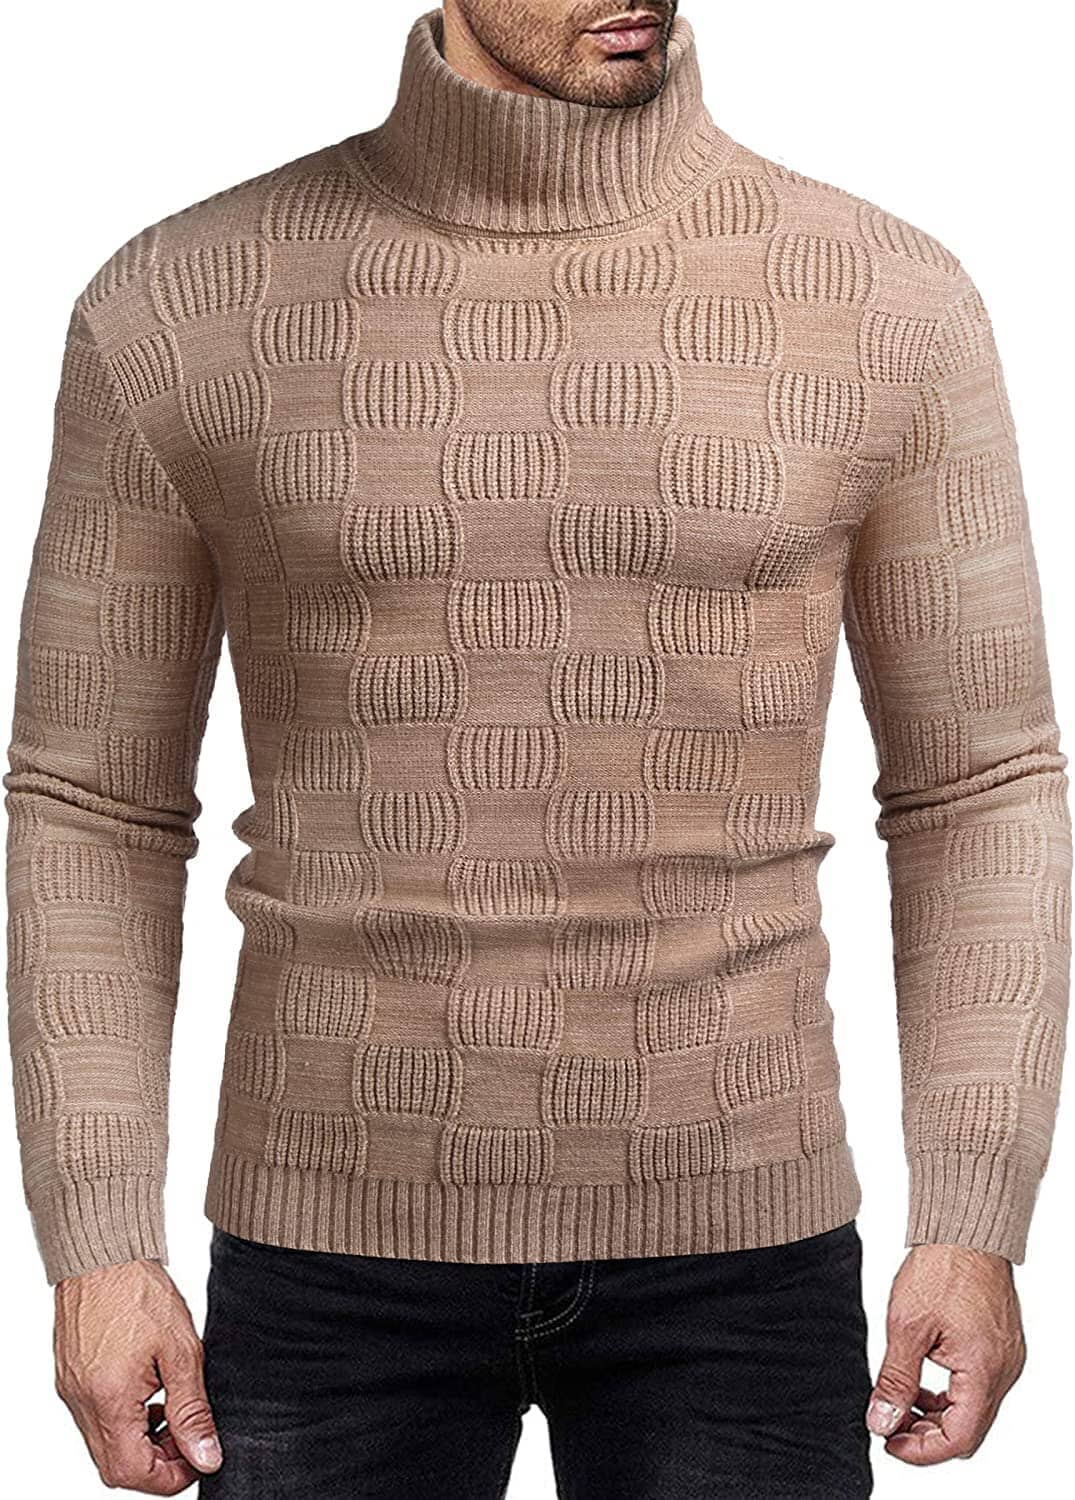 Men's Knitted Turtleneck Sweater Plaid Hightneck Long Sleeve Sweater (US Only) Sweaters COOFANDY Store Khaki S 